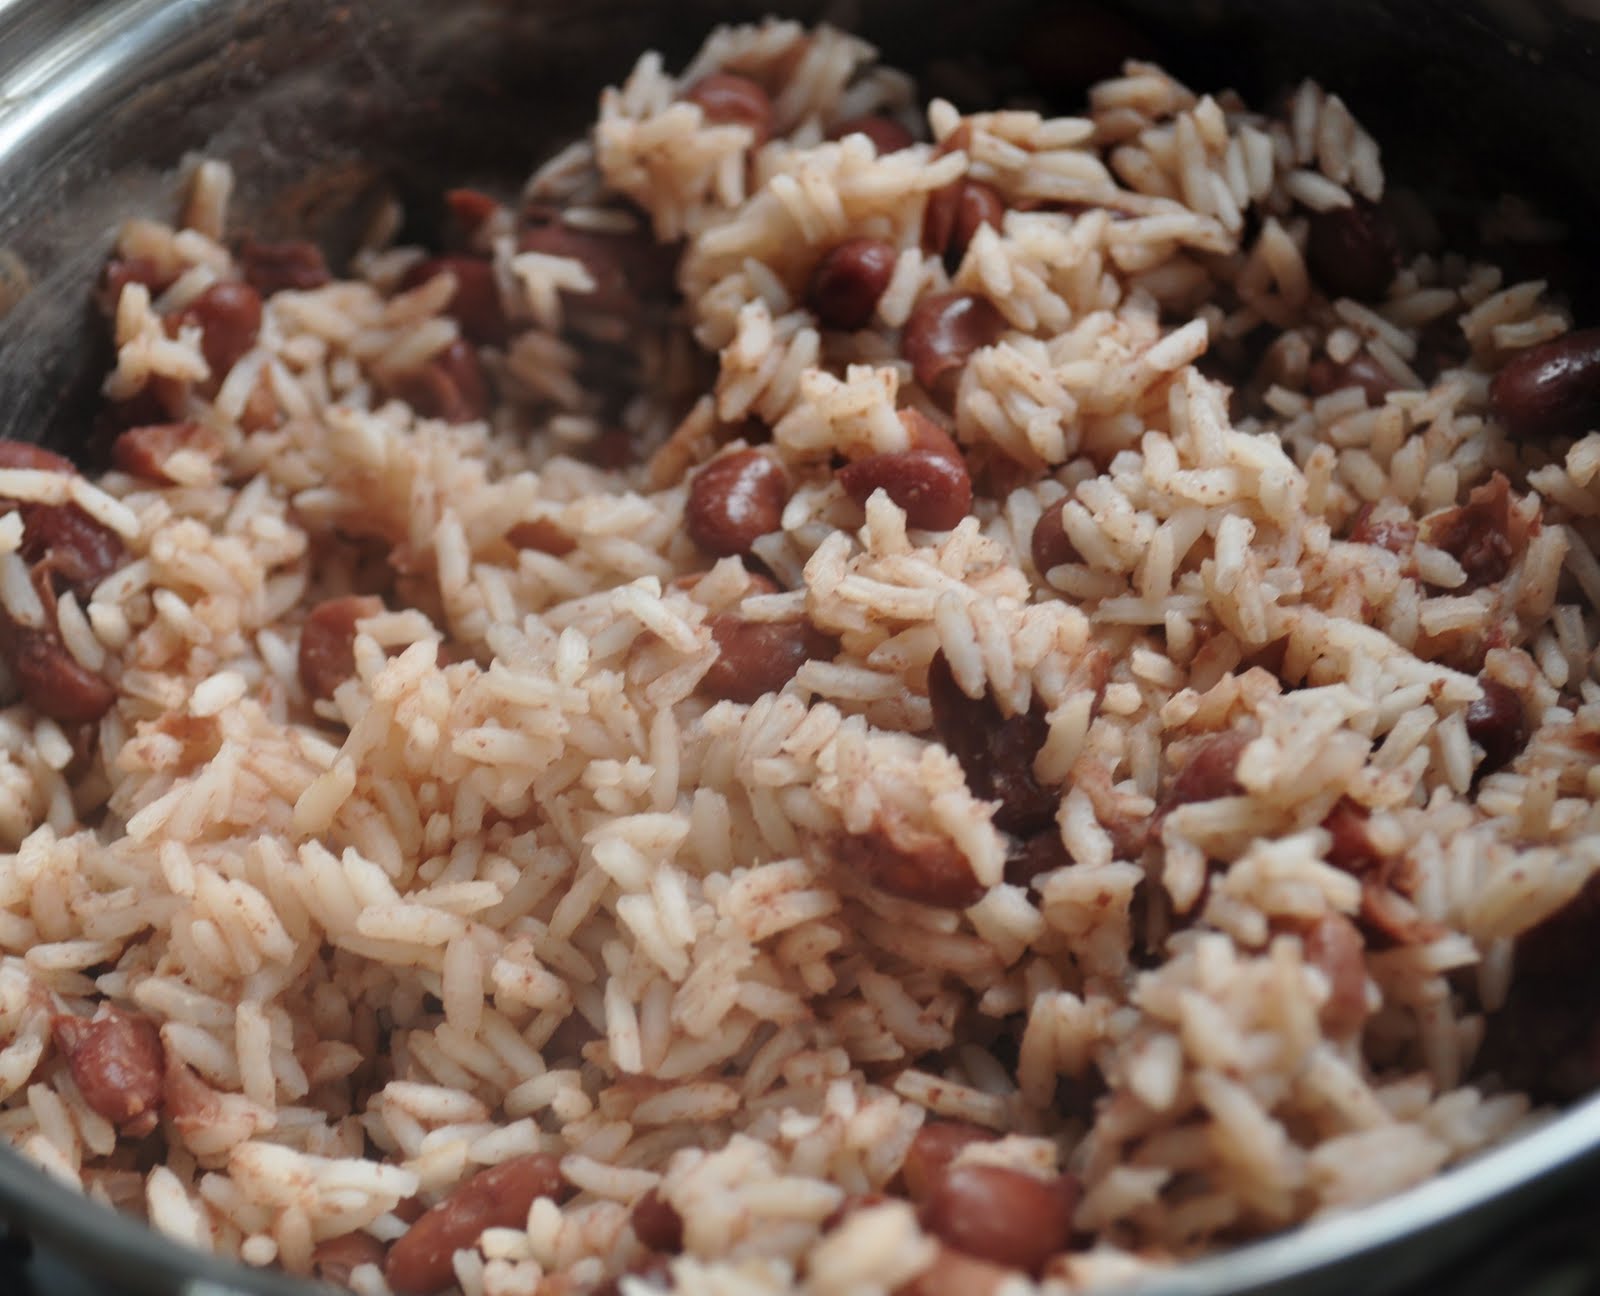 Belize Rice and Beans